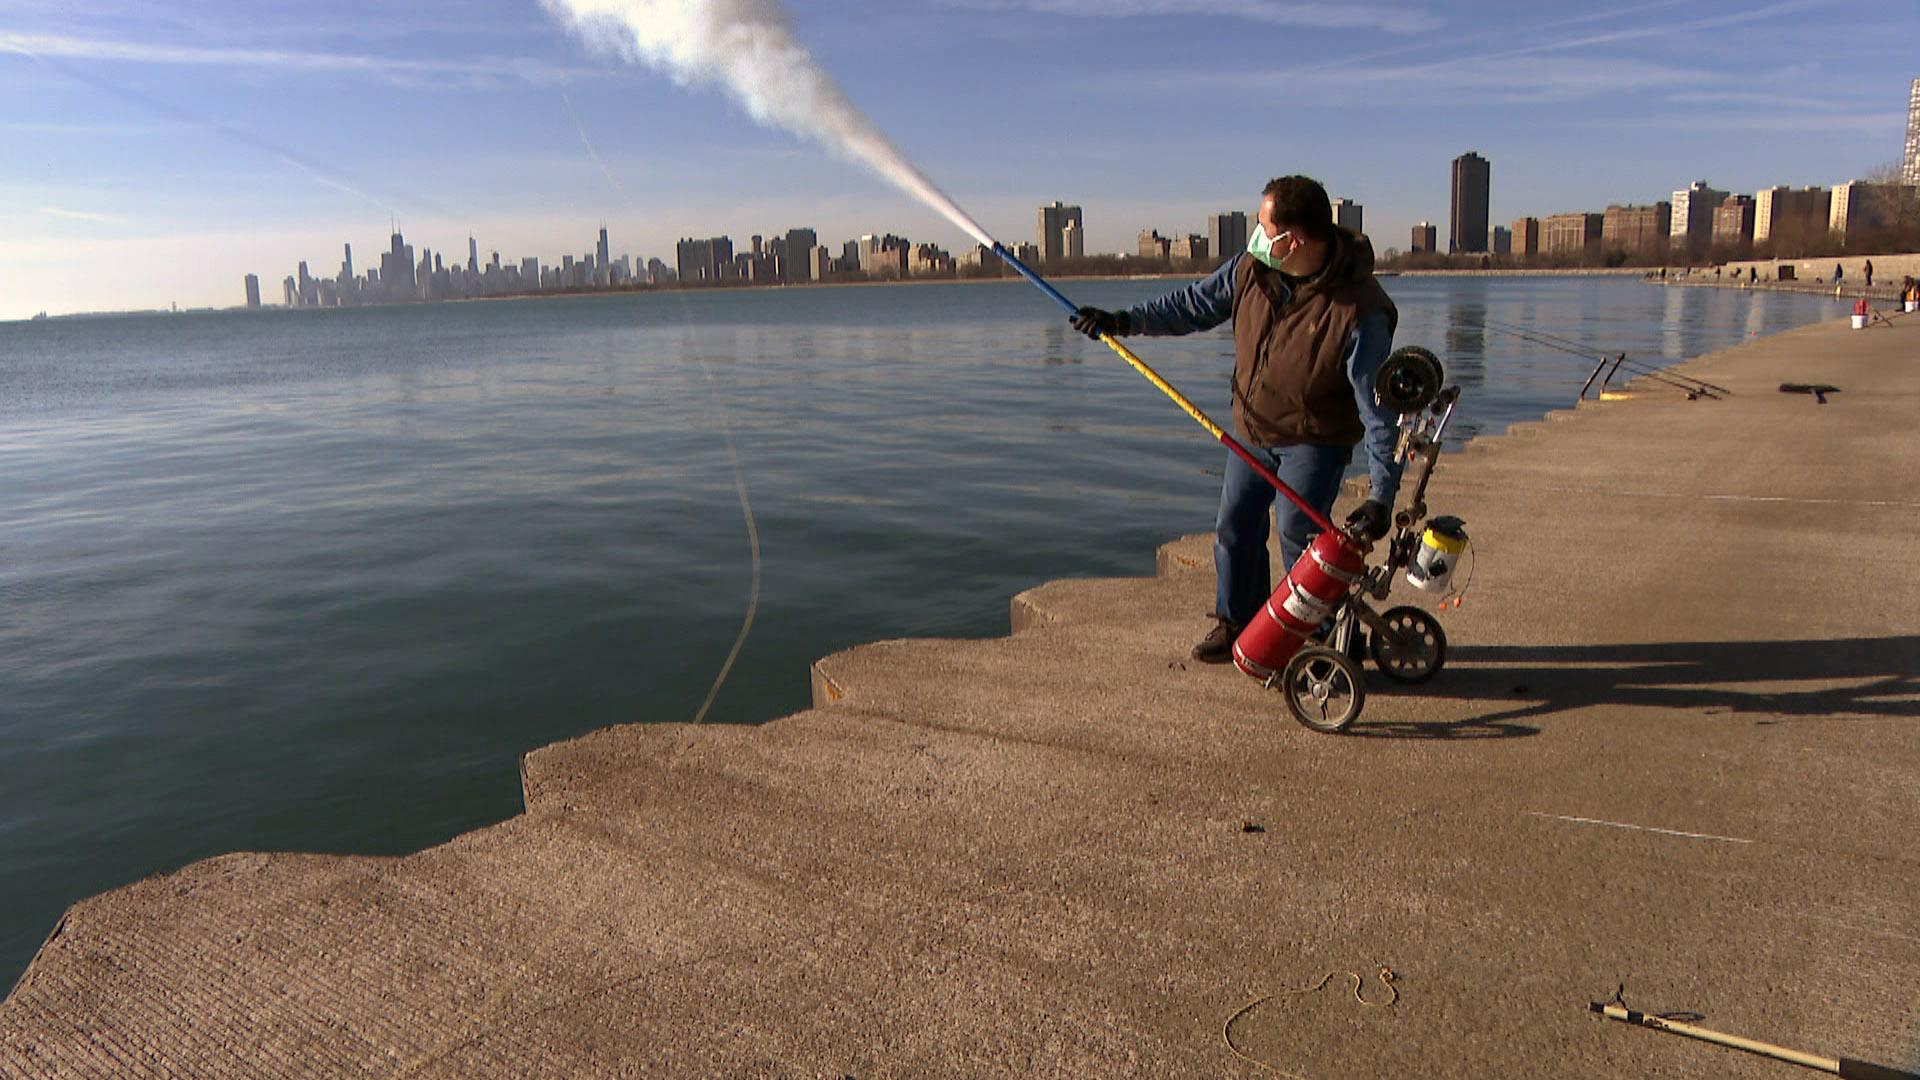 Fishing with a Fire Extinguisher? We Check Out Powerlining in Chicago, Chicago News